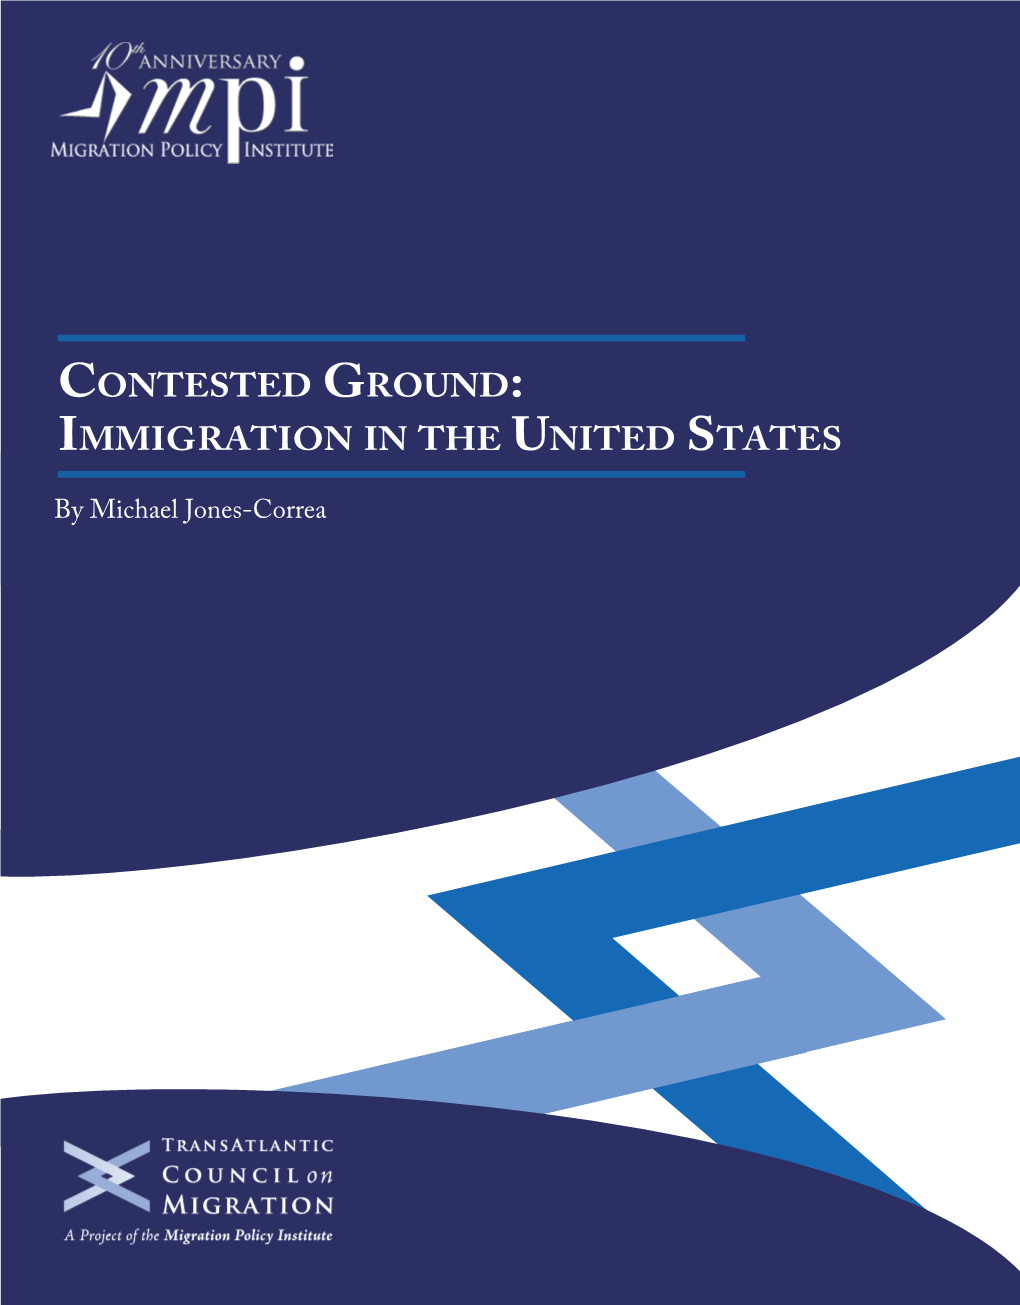 Contested Ground: Immigration in the United States by Michael Jones-Correa TRANSATLANTIC COUNCIL on MIGRATION